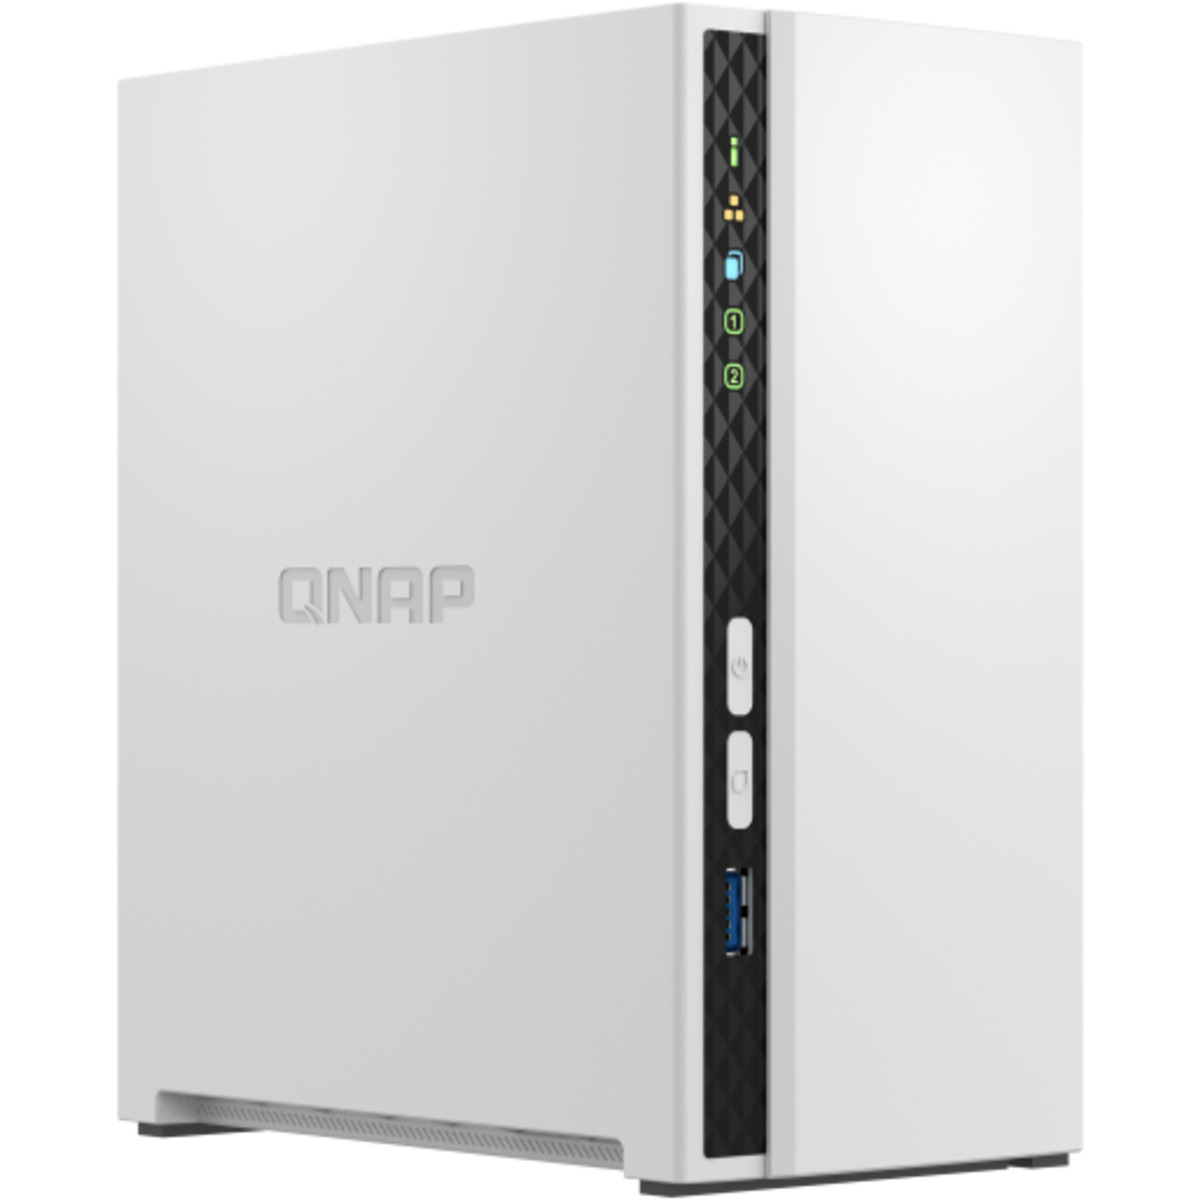 QNAP TS-233 8tb 2-Bay Desktop Personal / Basic Home / Small Office NAS - Network Attached Storage Device 2x4tb Western Digital Red Pro WD4003FFBX 3.5 7200rpm SATA 6Gb/s HDD NAS Class Drives Installed - Burn-In Tested TS-233